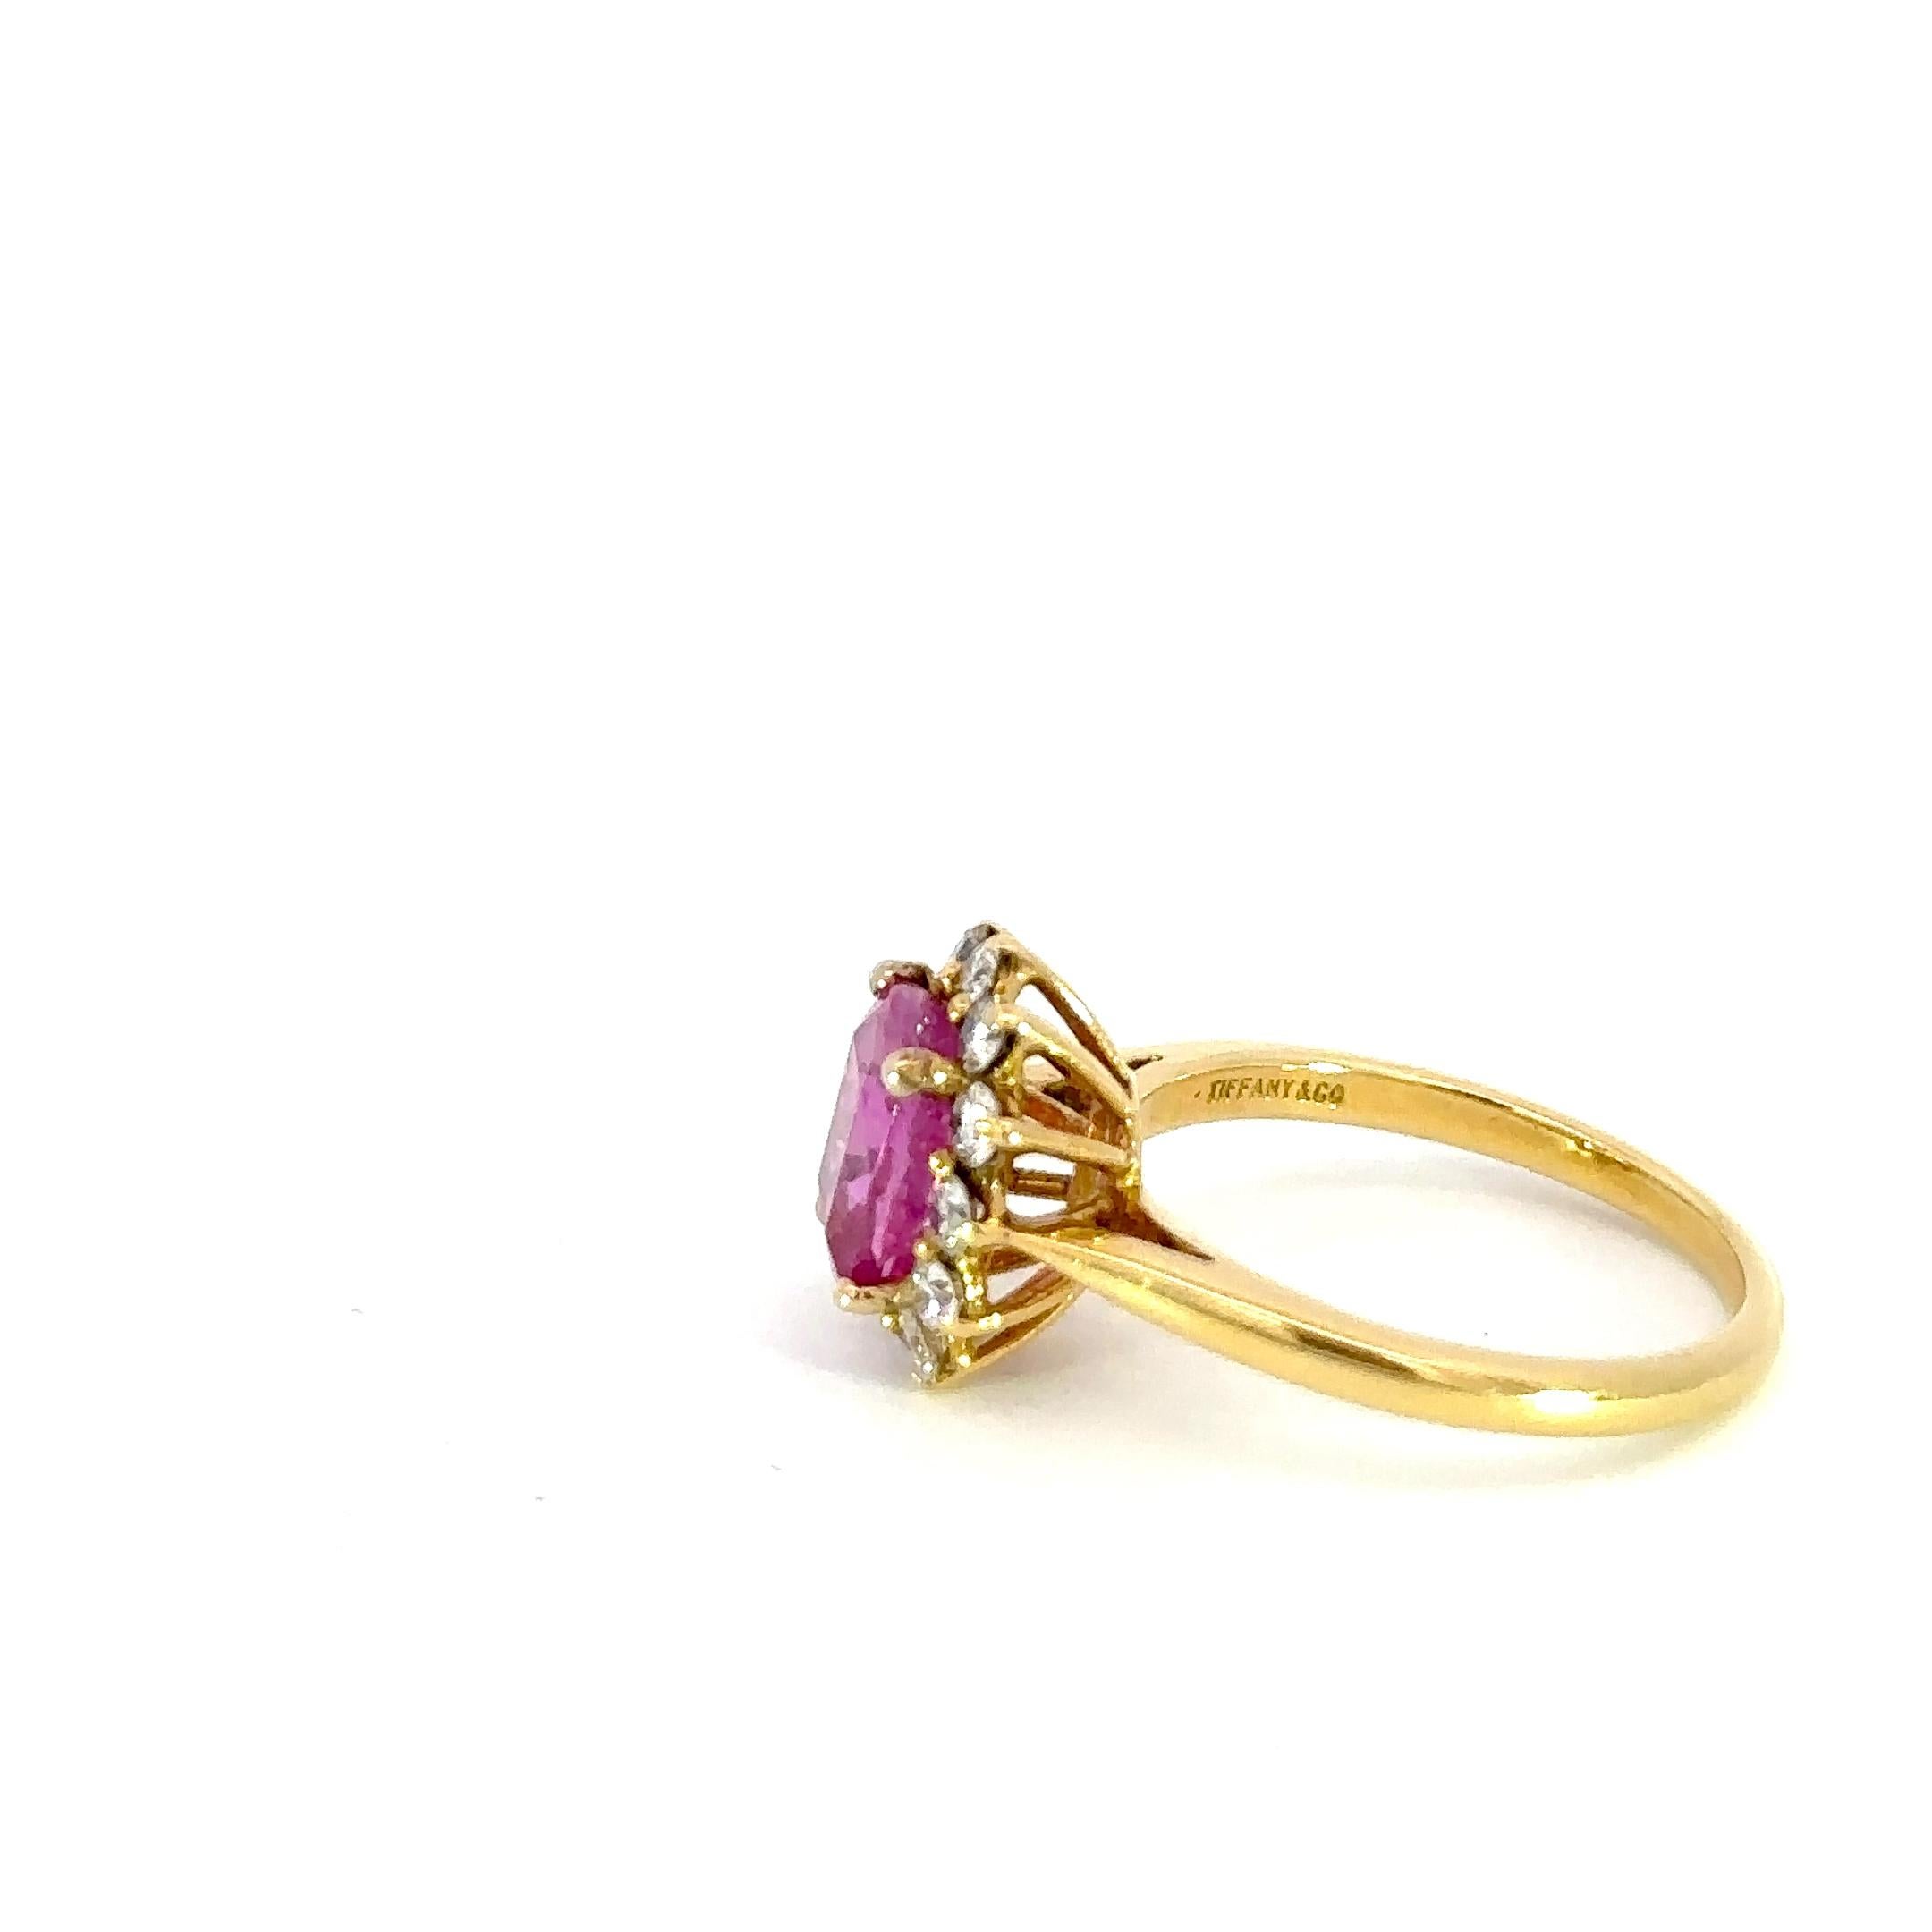 This exquisite ring features a brilliant 2.06 carat pink sapphire at its center, which has been certified by the GIA for its quality and authenticity. The pink sapphire is surrounded by a delicate rosette of sparkling white diamonds, enhancing its